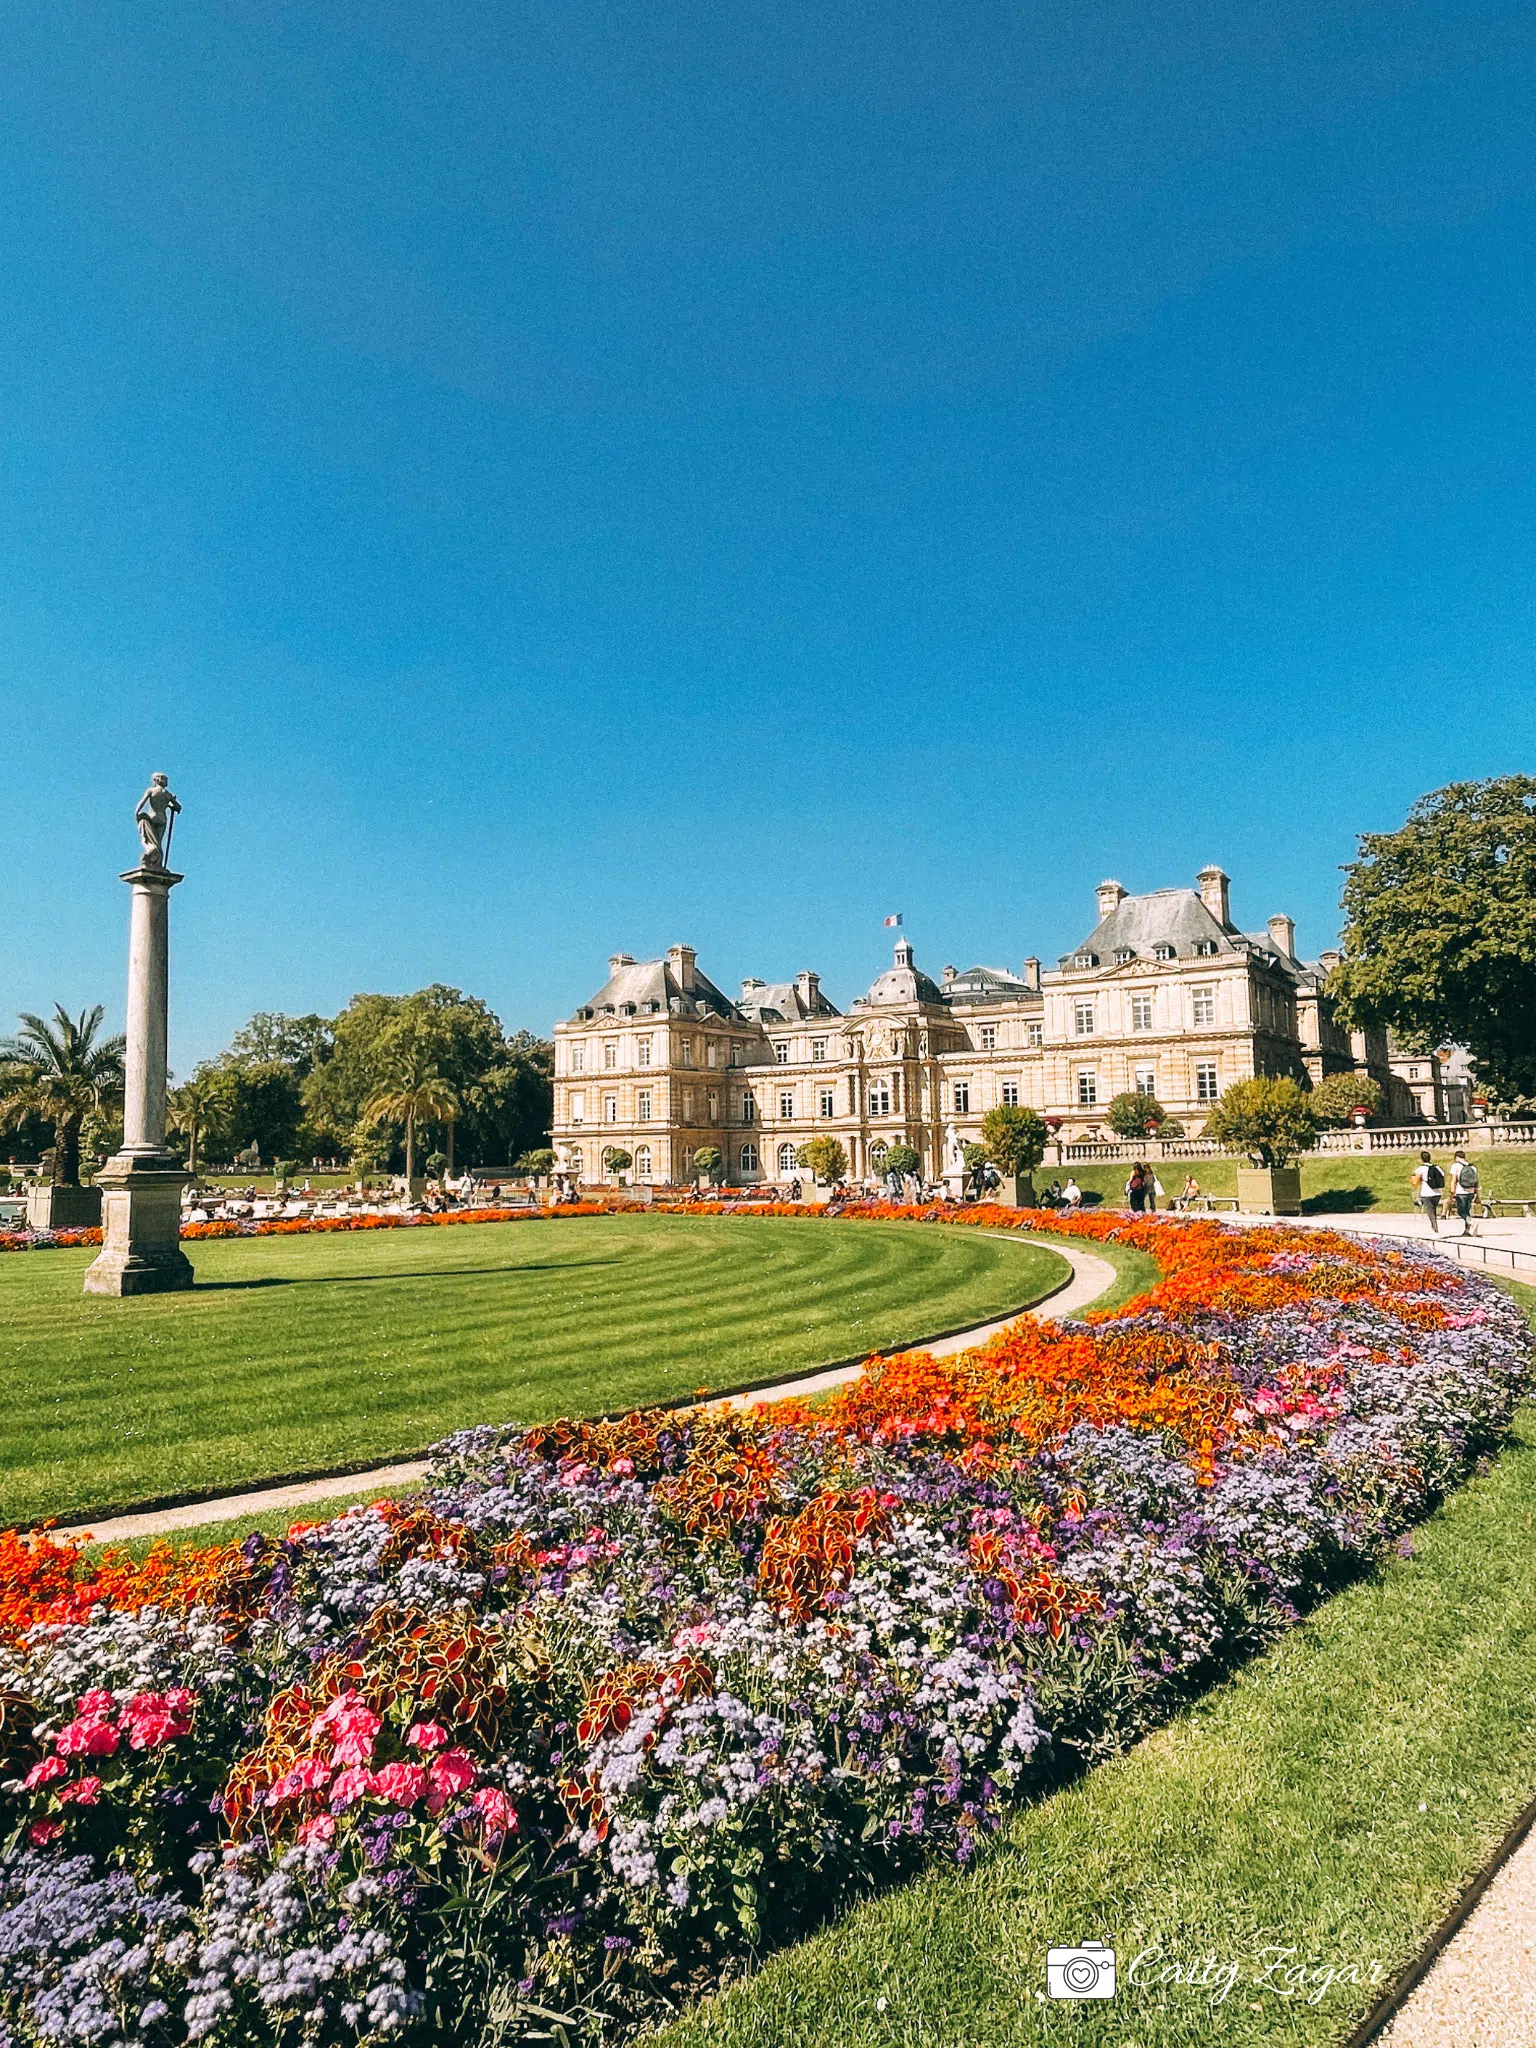 rows of flowers with the Luxembourg Palace in the background - a beautiful summer day in the Luxembourg Gardens 